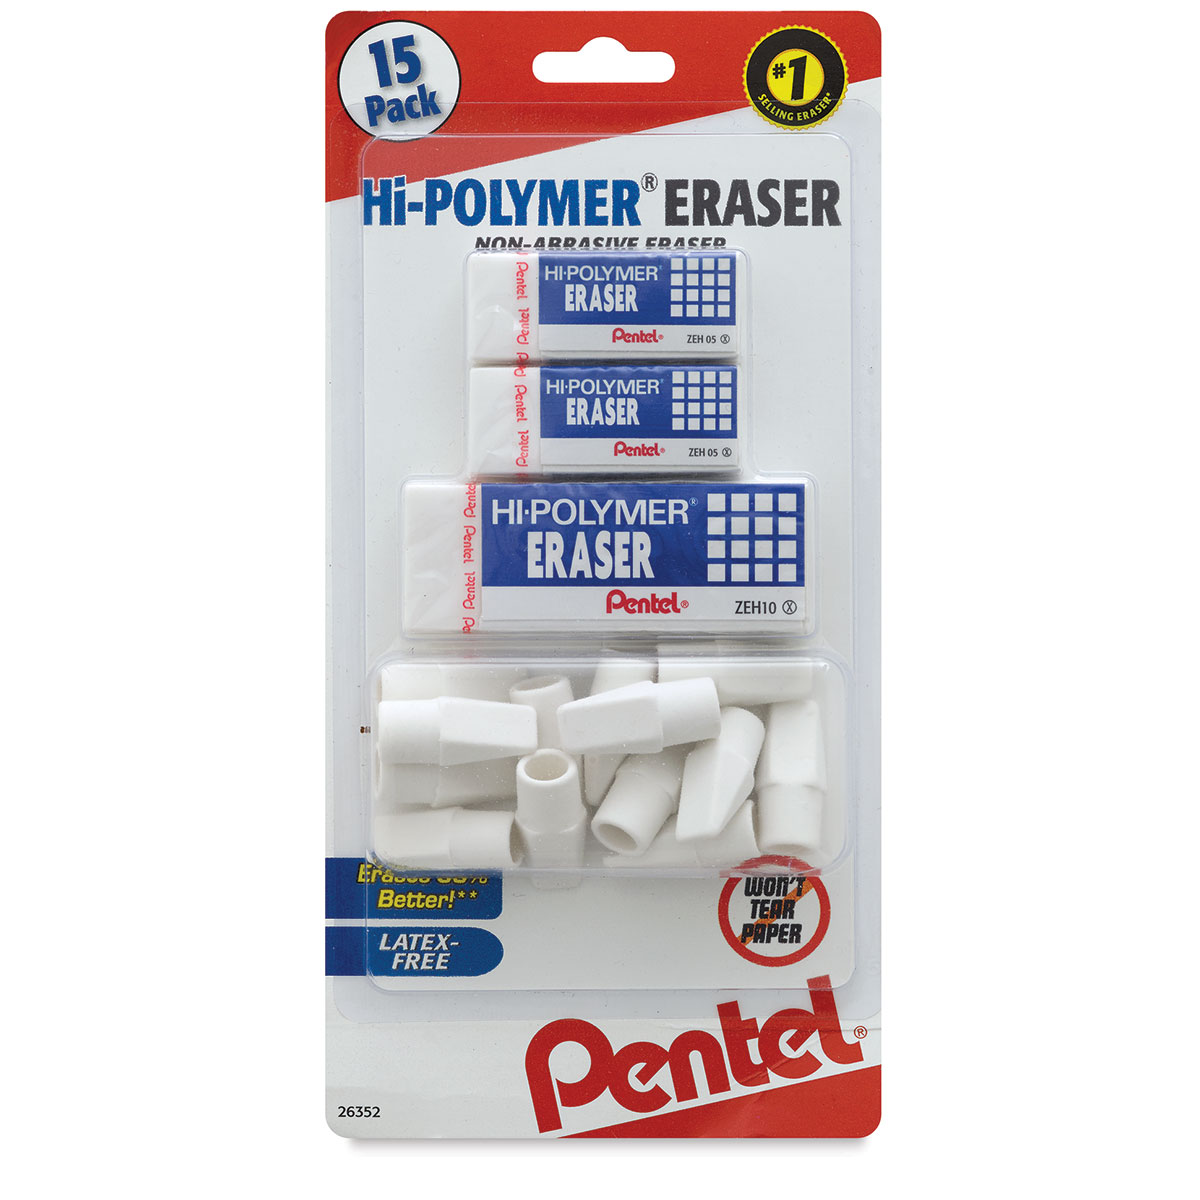  Tamaki 6 Pack Pencil Erasers, Large White Erasers for